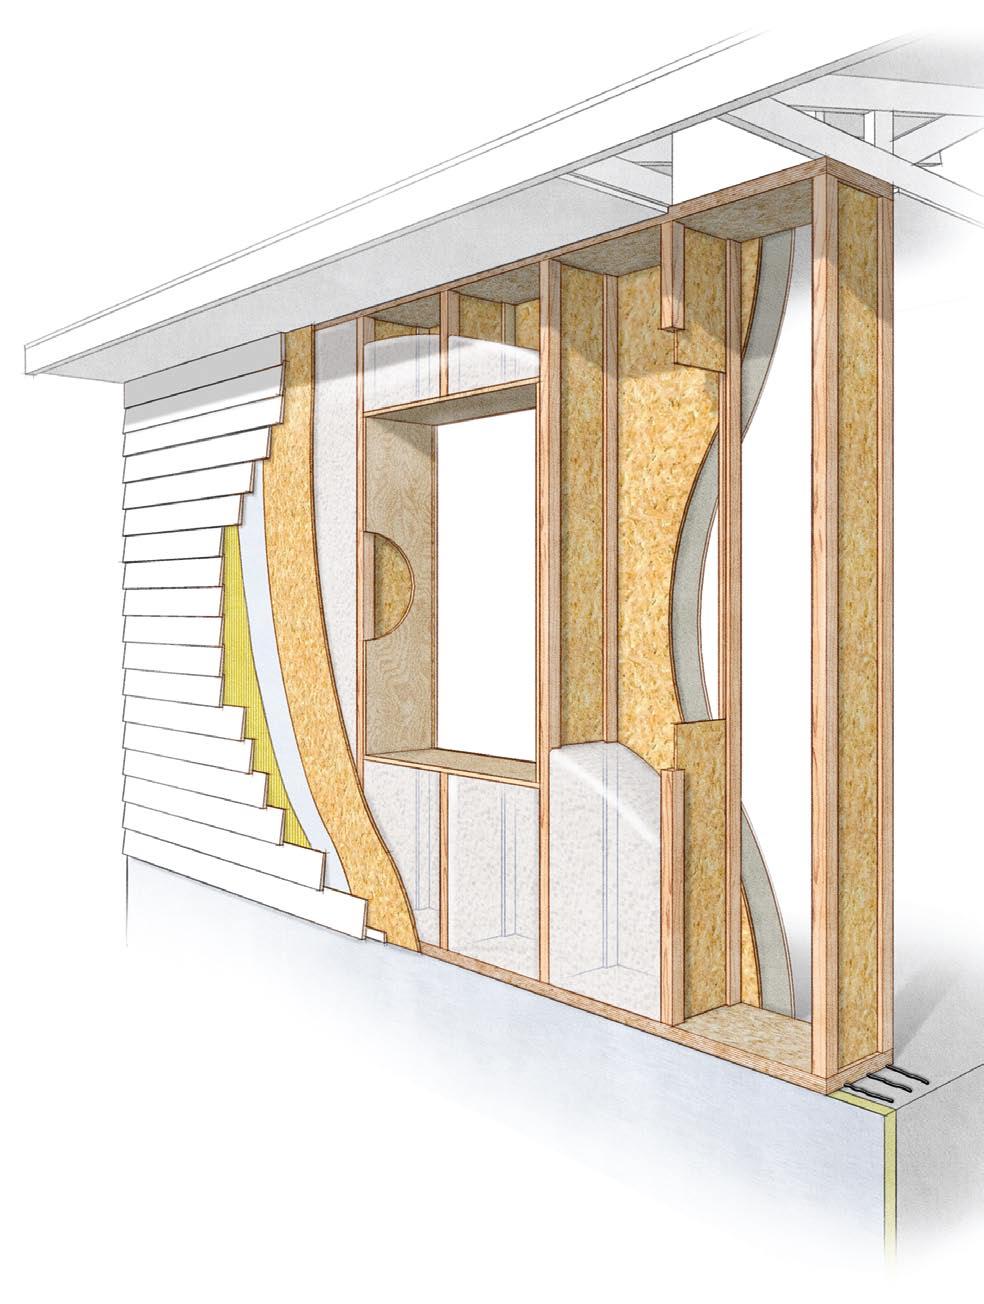 3 Inspired by the Passive house, walls made of Engineered lumber This system was used by katrin Klingenberg to introduce the German Passive House program to the United States.